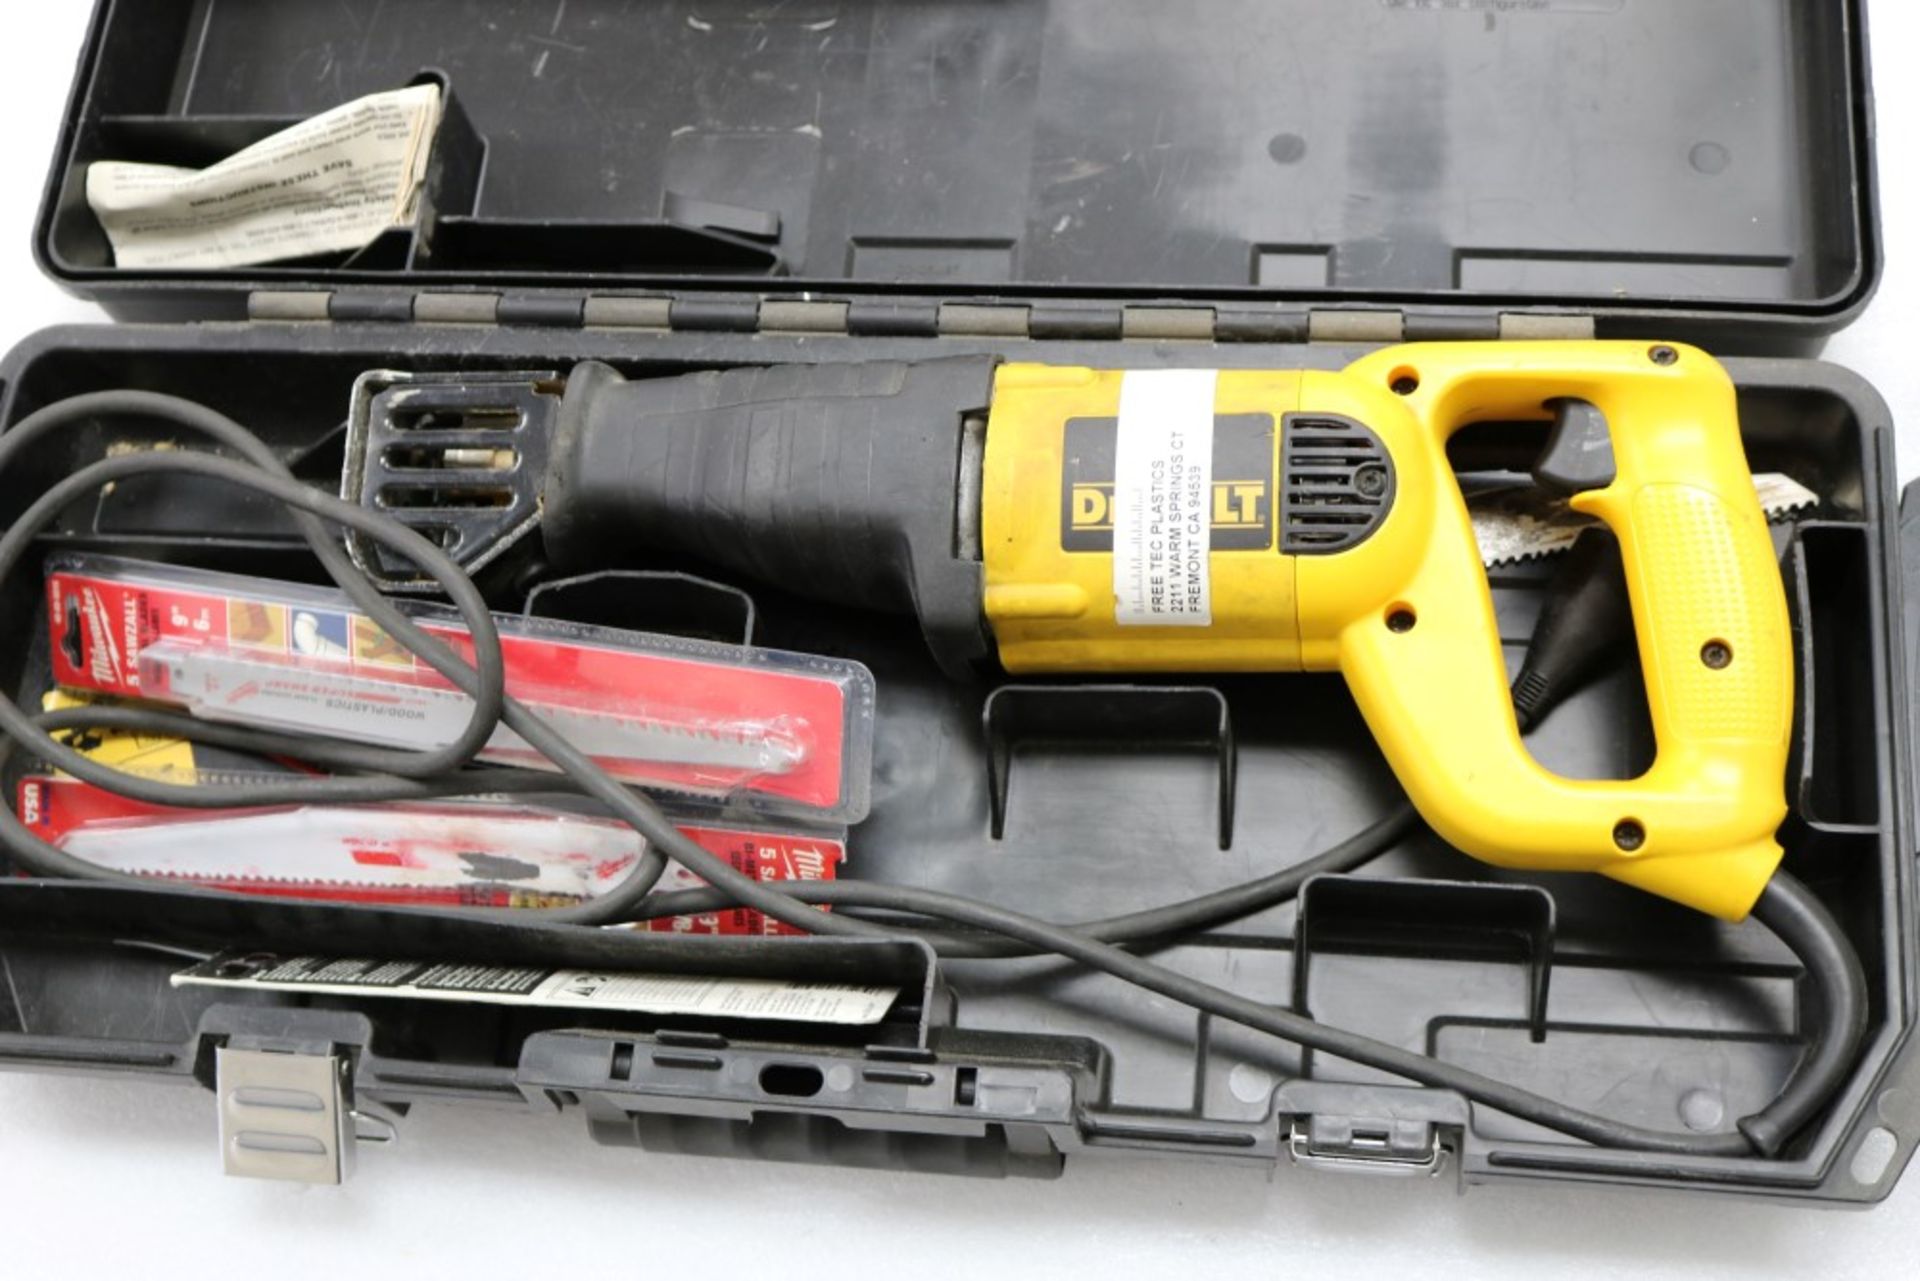 Dewalt VS Reciprocating Saw 1 1/8" Stroke Model DW304P with Extra Blades - Image 3 of 5